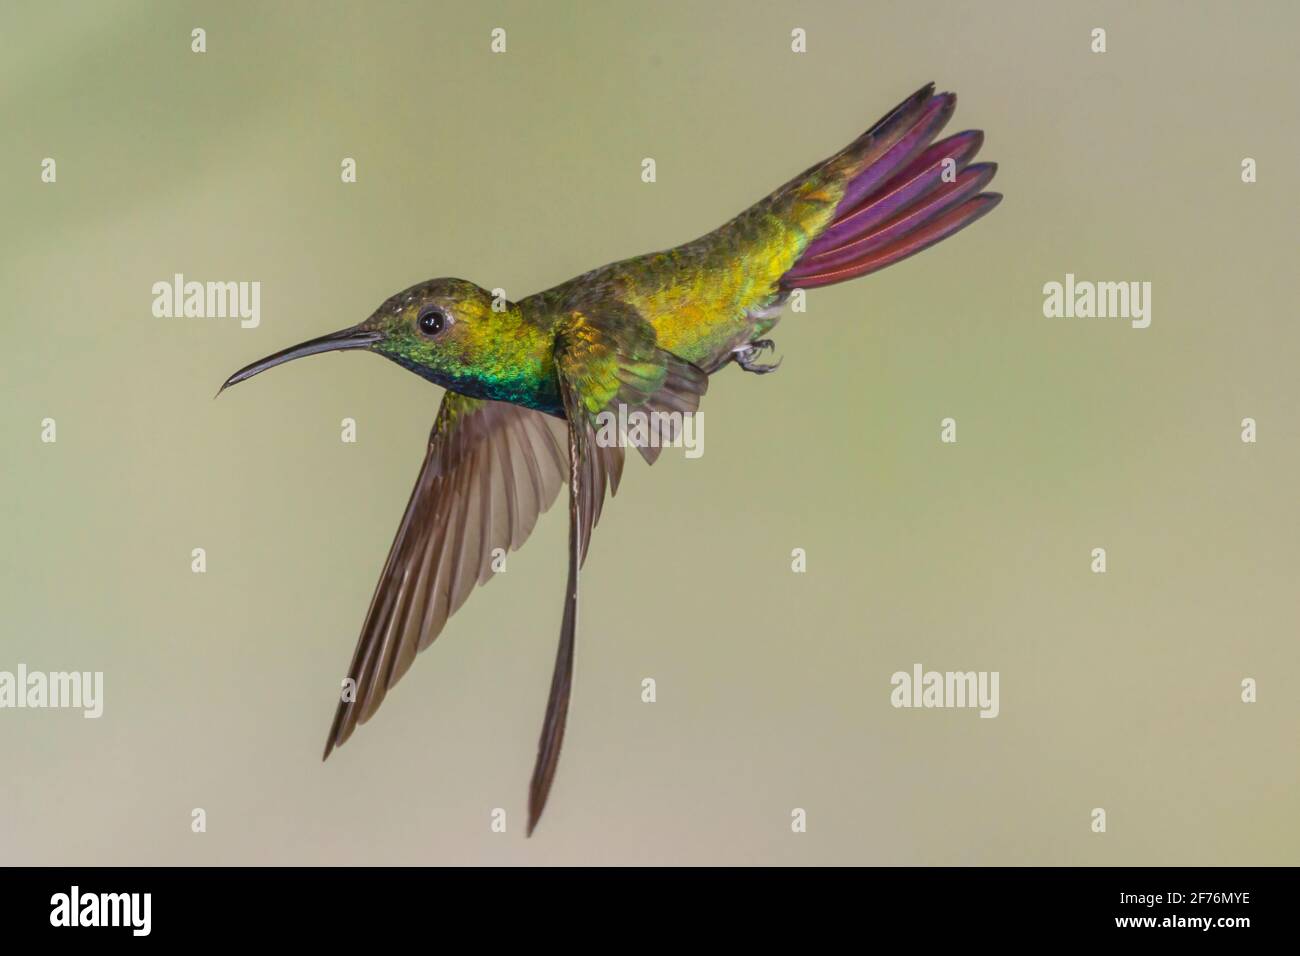 green-breasted mango hummingbird, Anthracothorax prevostii, single adult male hovering near flower, Costa Rica Stock Photo